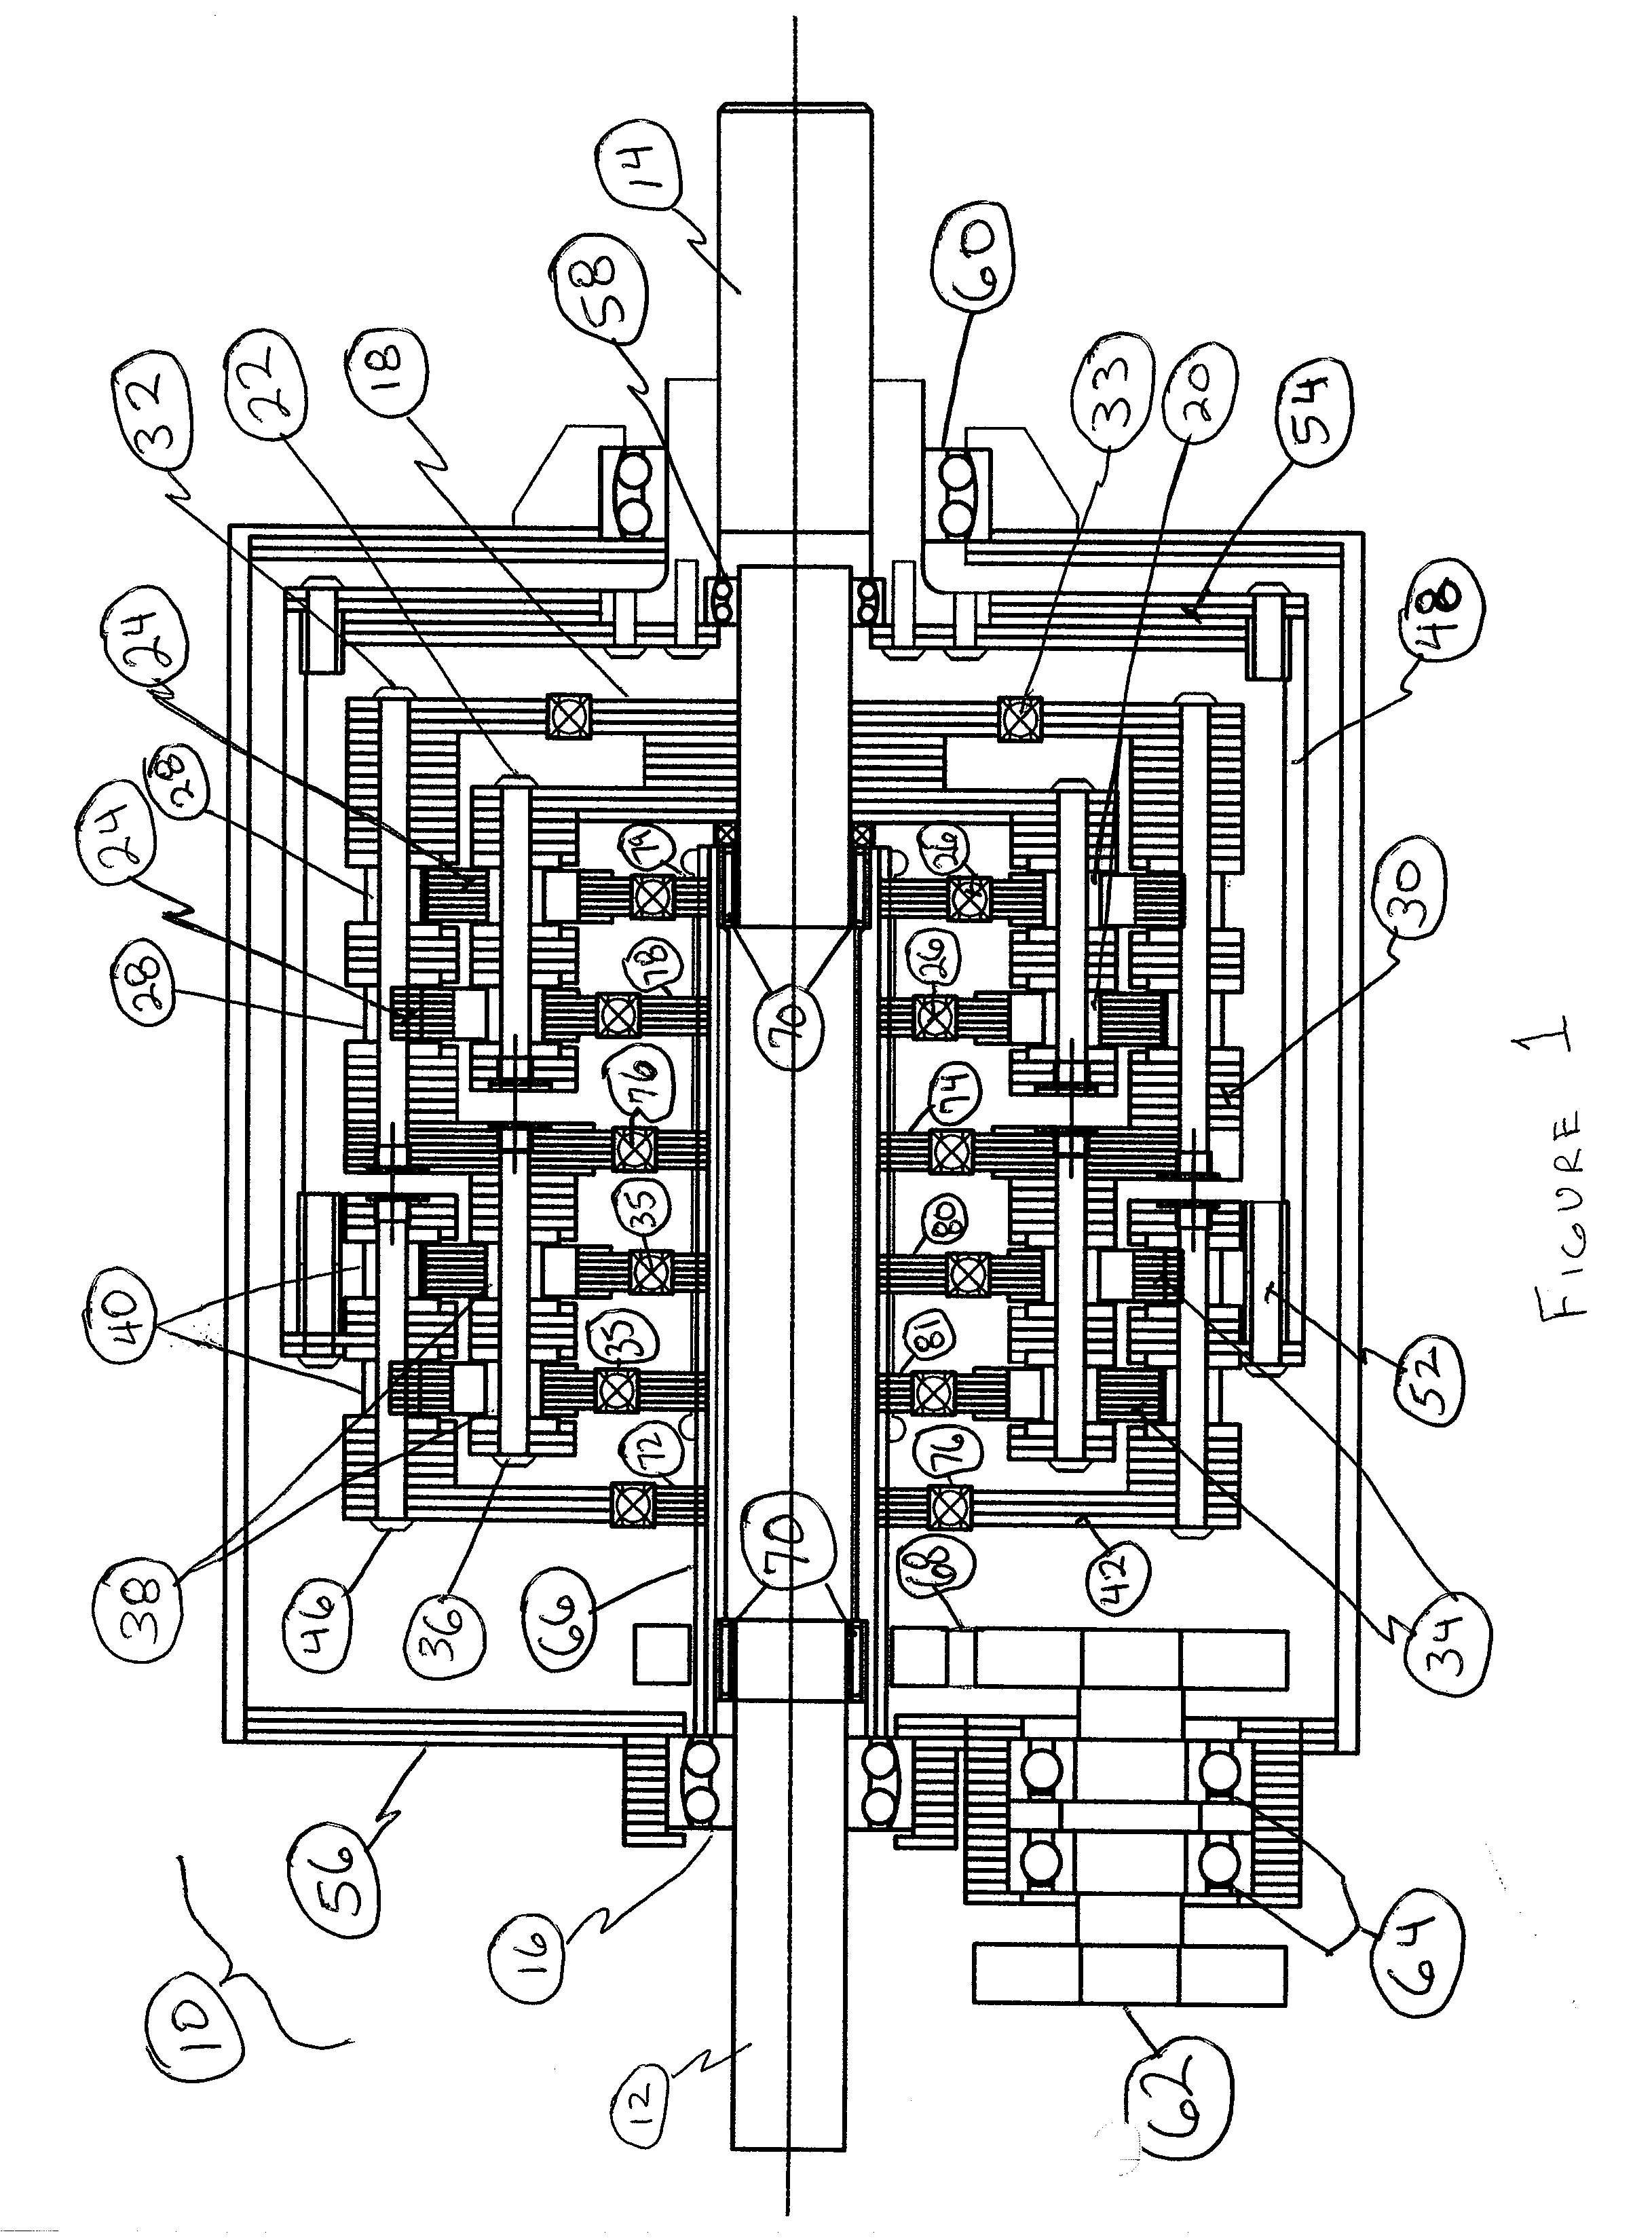 Power transmission system with continuously variable speed control